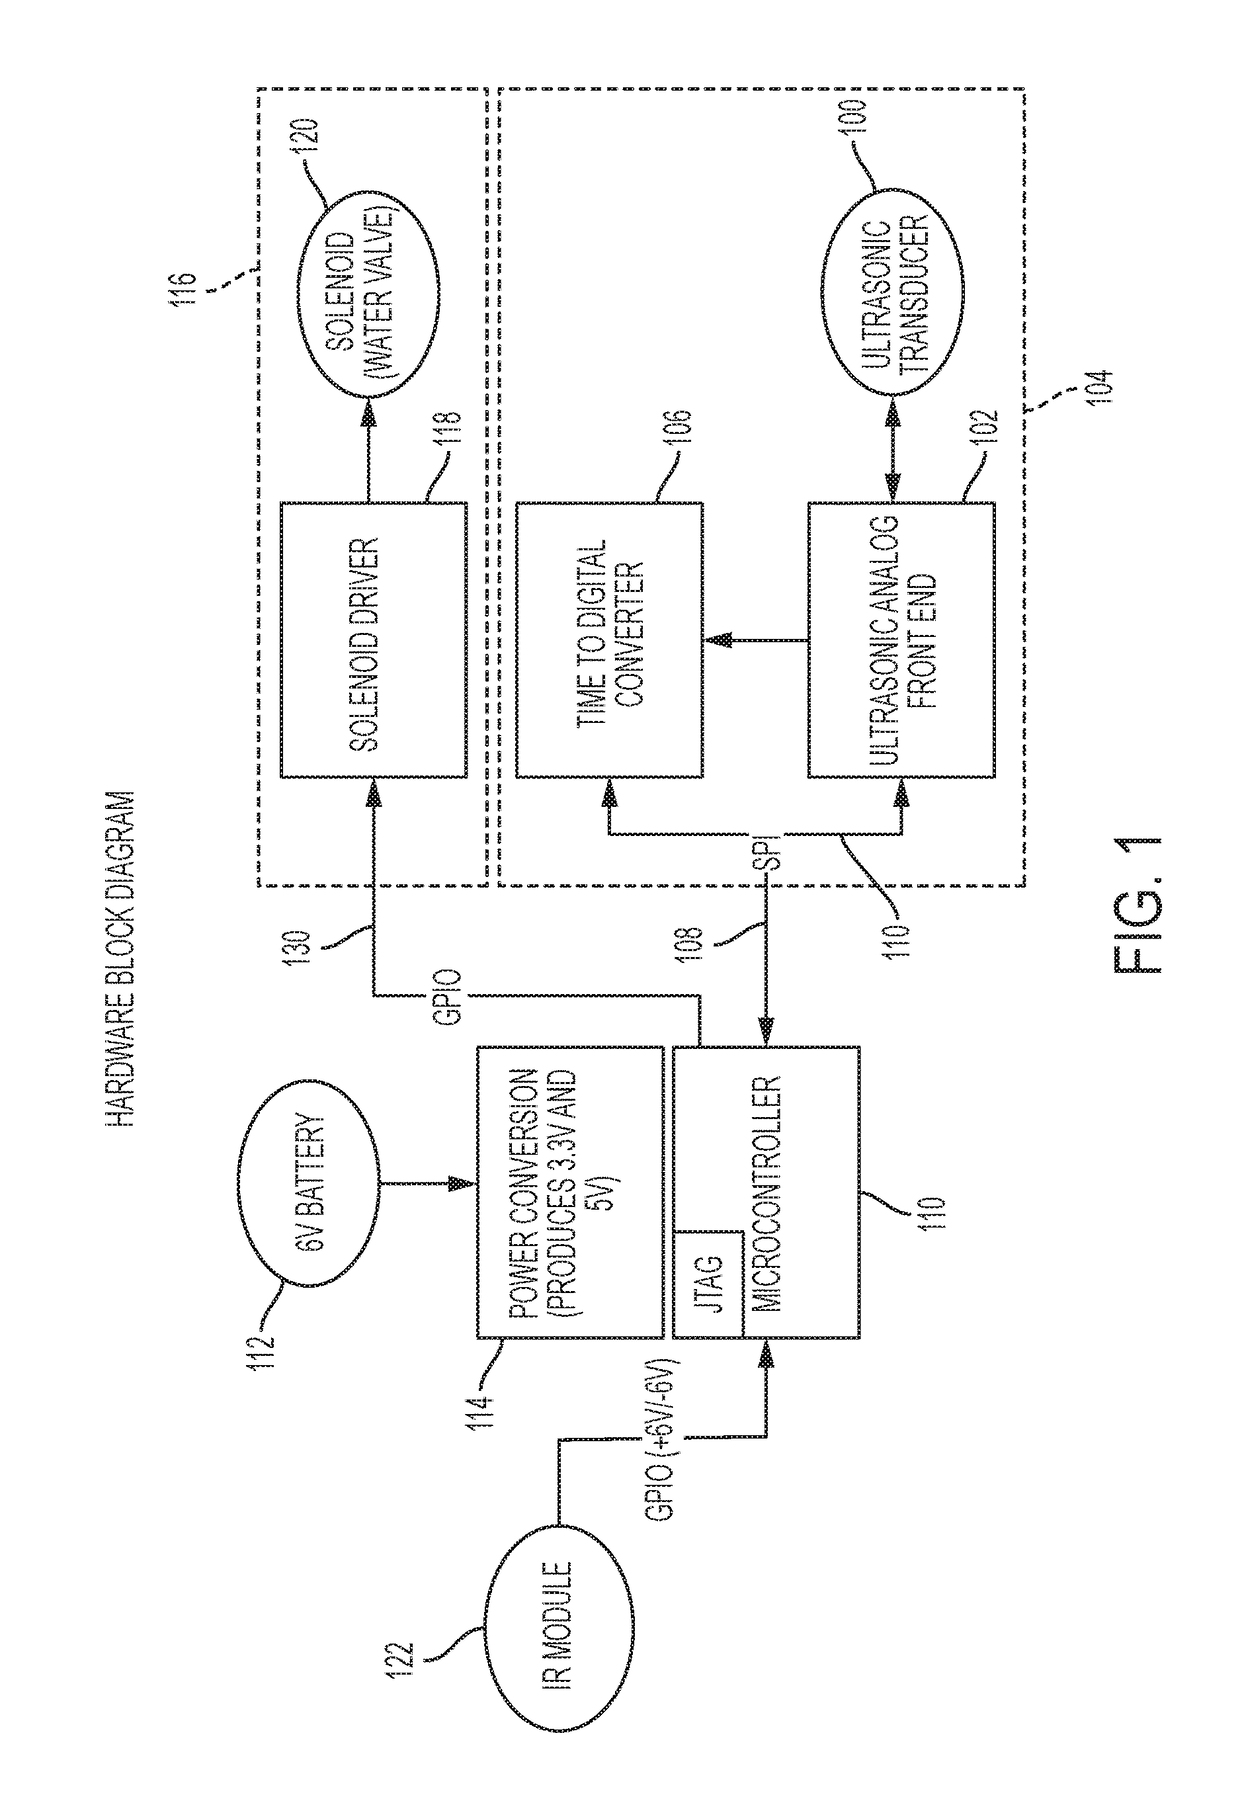 Systems to Automate Adjustment of Water Volume Release To A Toilet Bowl To Correspond to Bowl Contents, Toilets Including the System and Related Methods